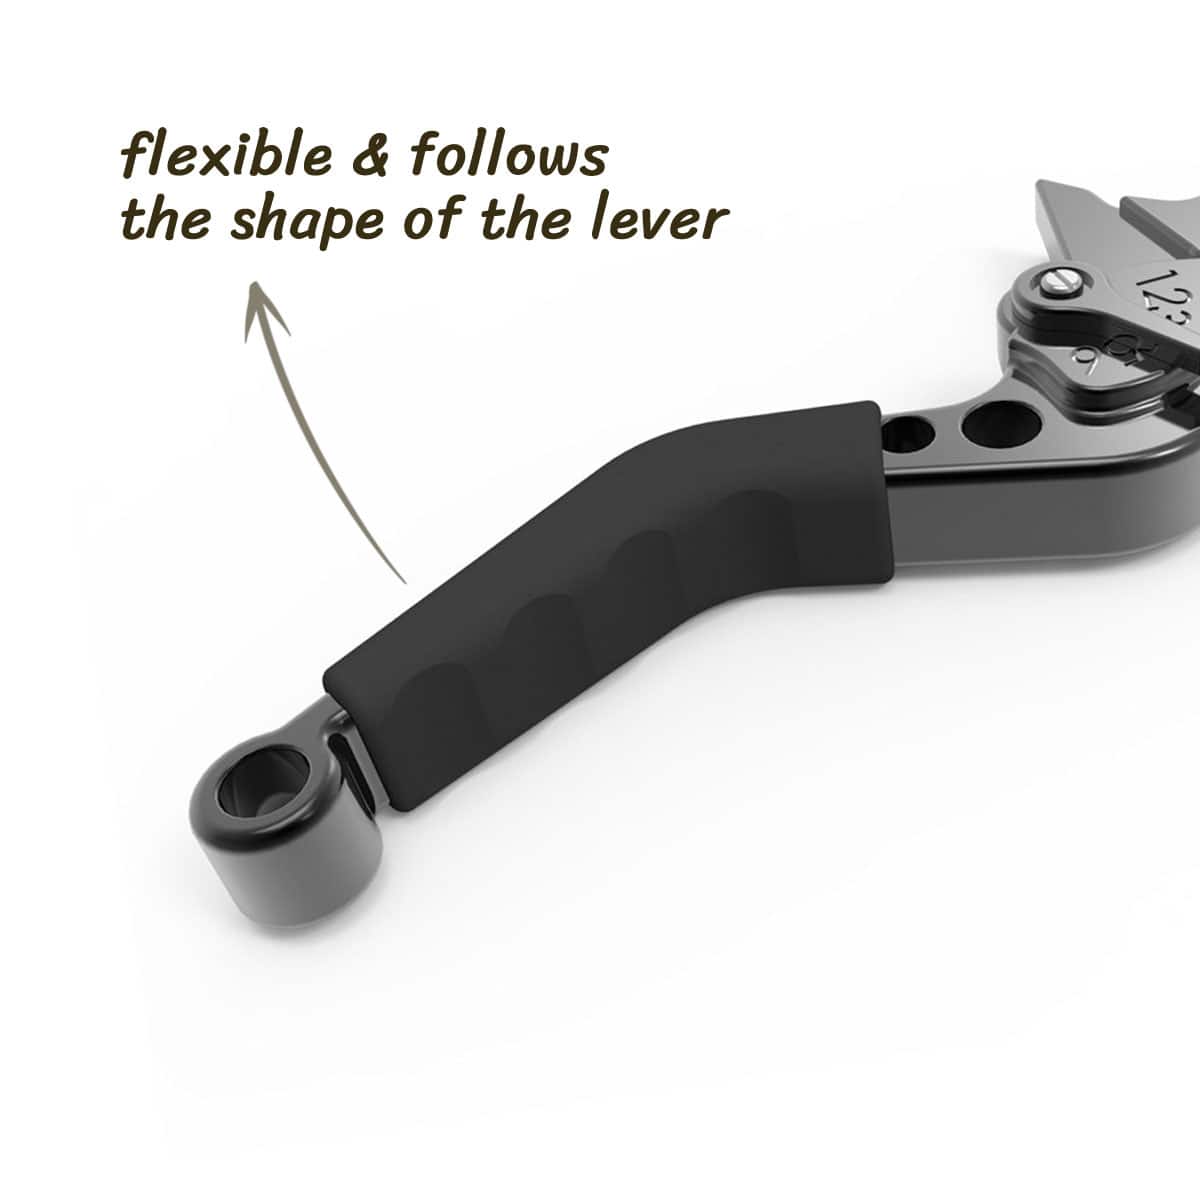 Foam Brake/Clutch Lever Sleeves: Insulate your Finger Tips from the cold of the levers